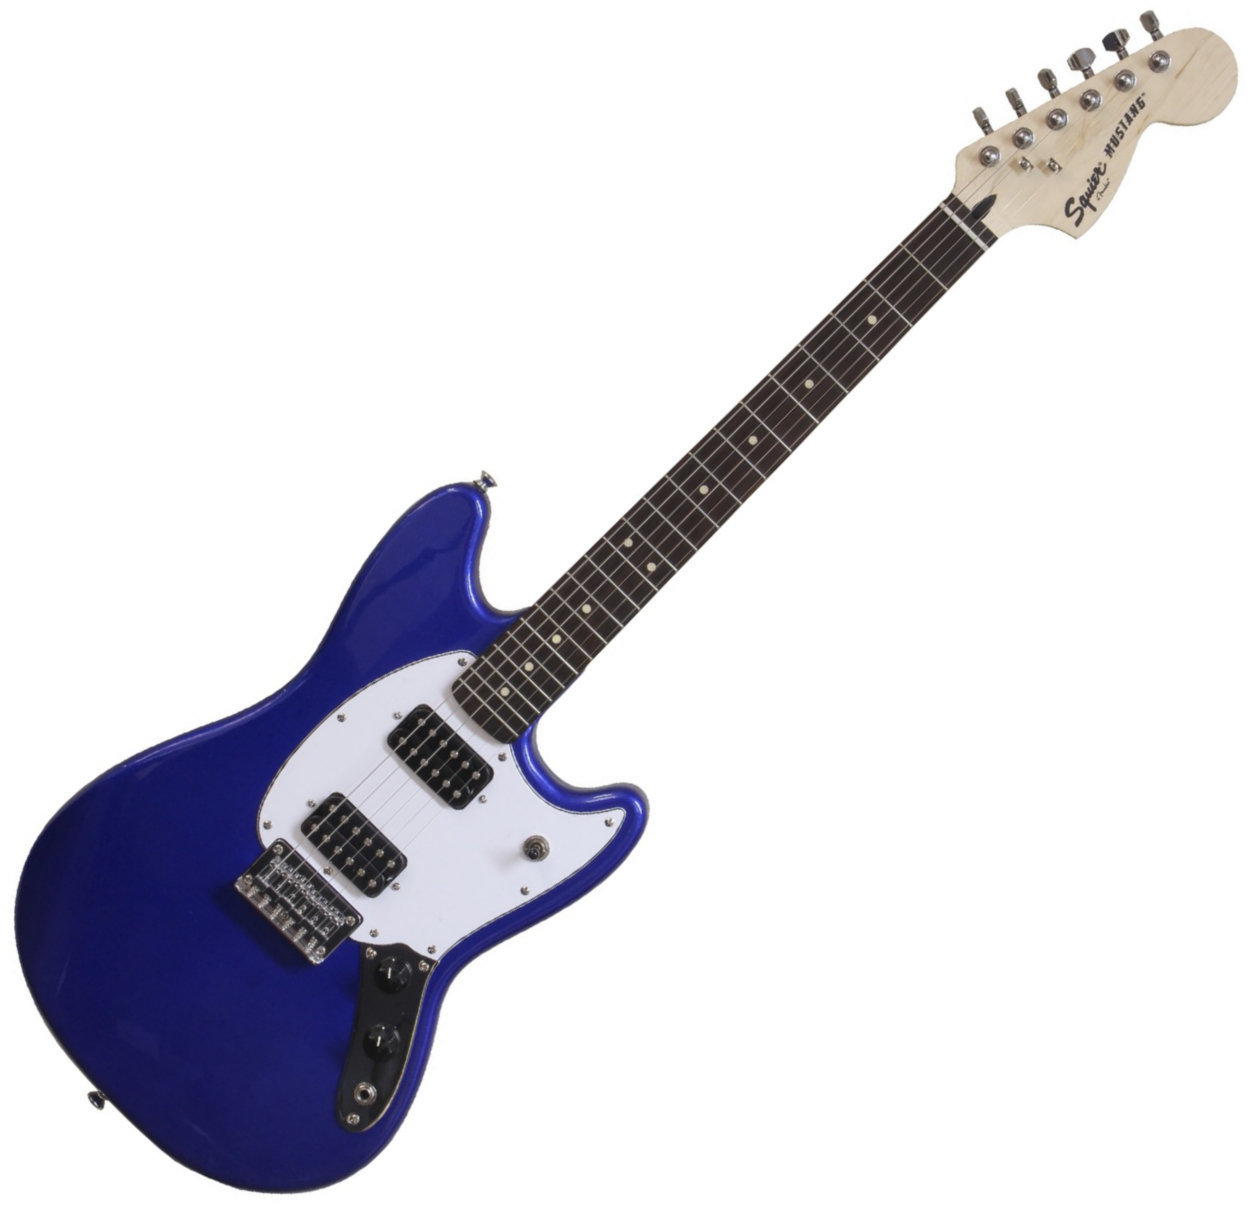 Electric guitar Fender Squier Bullet Mustang HH RW Imperial Blue